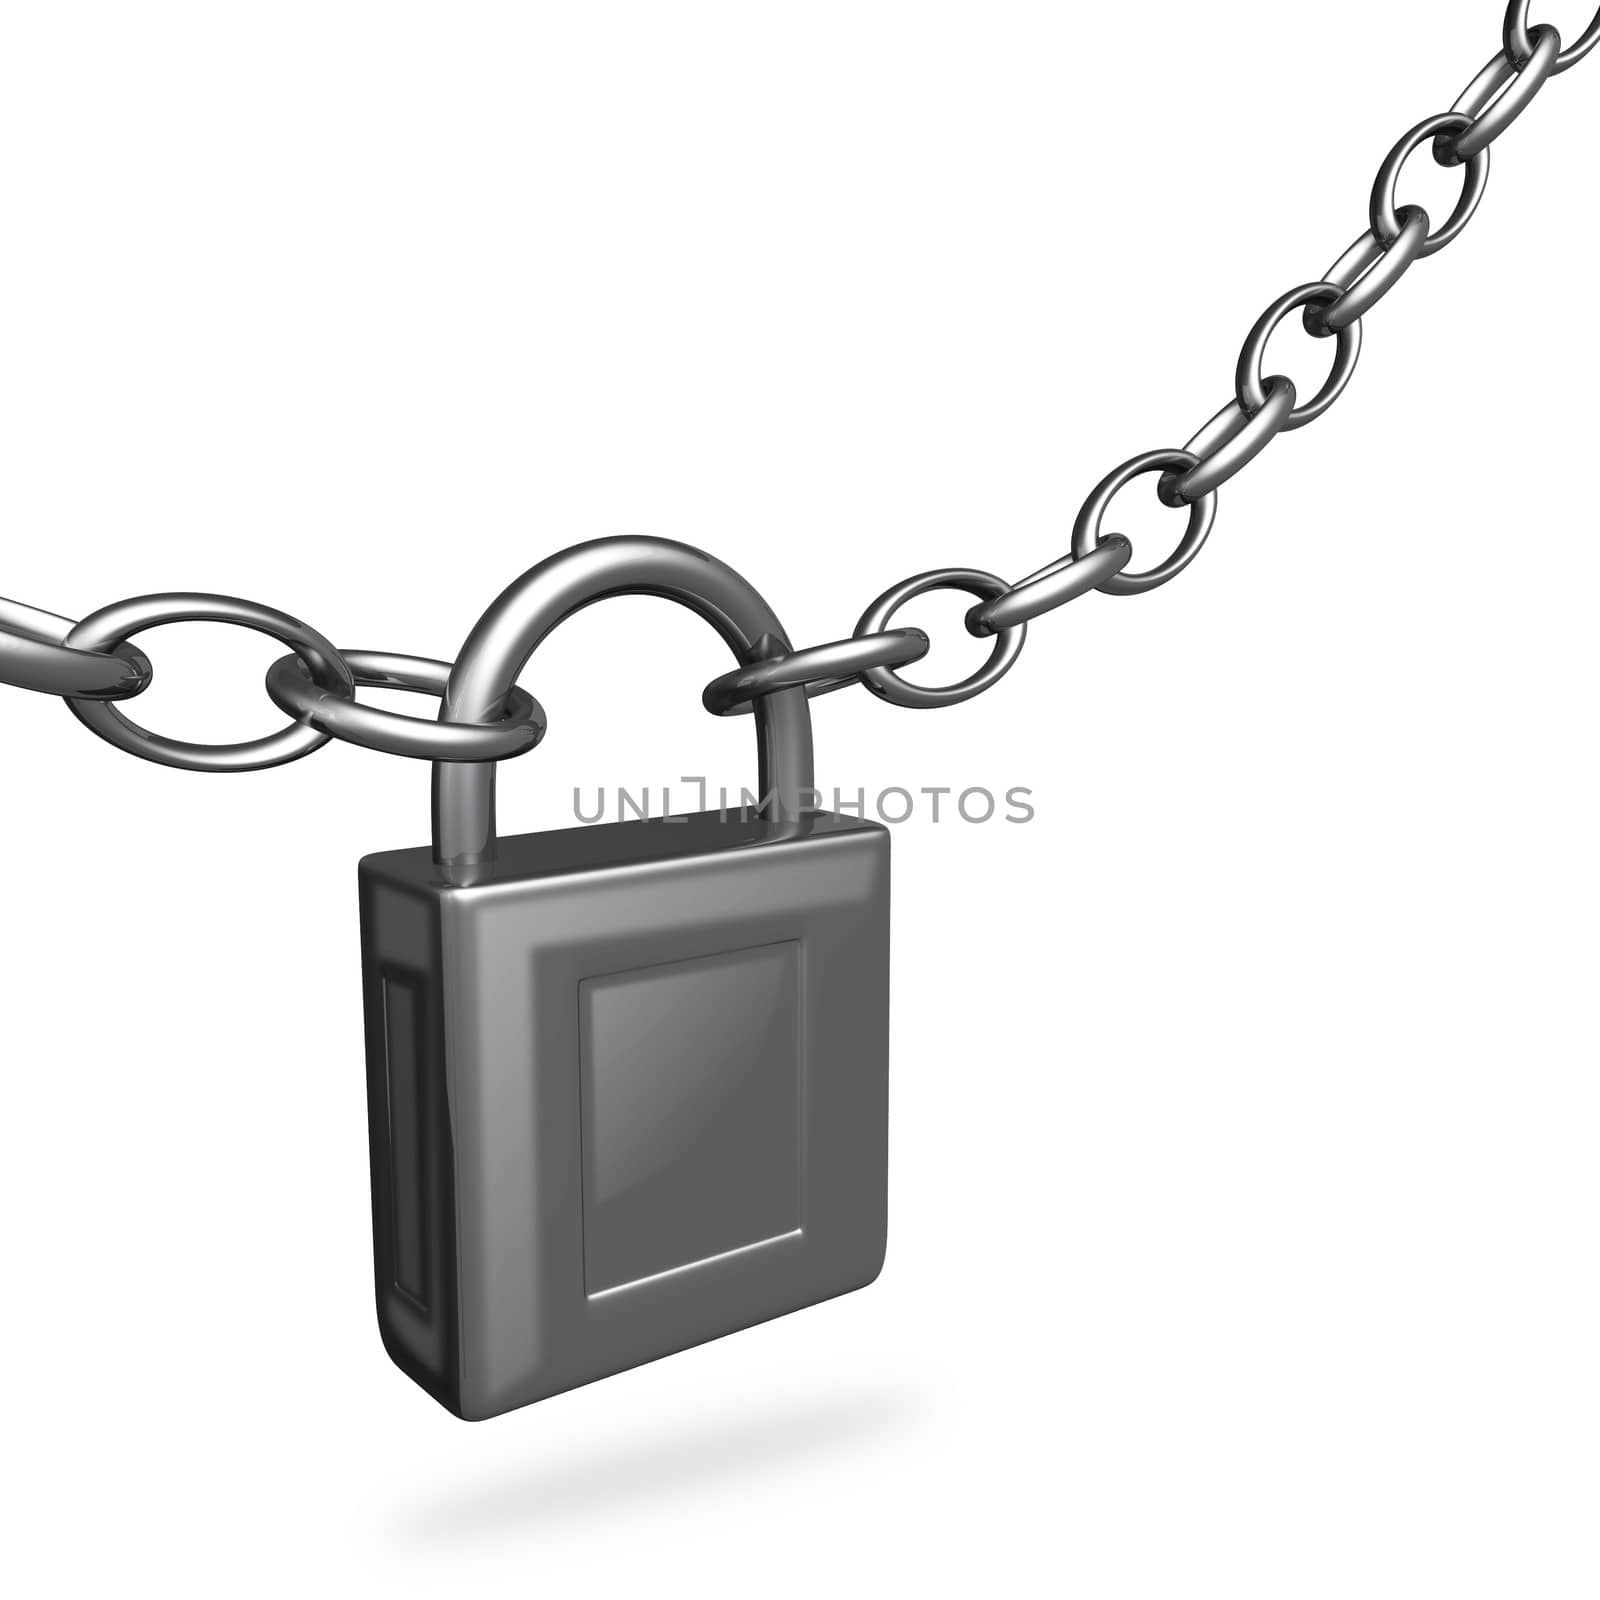 3D Steel Lock and Chain by RichieThakur